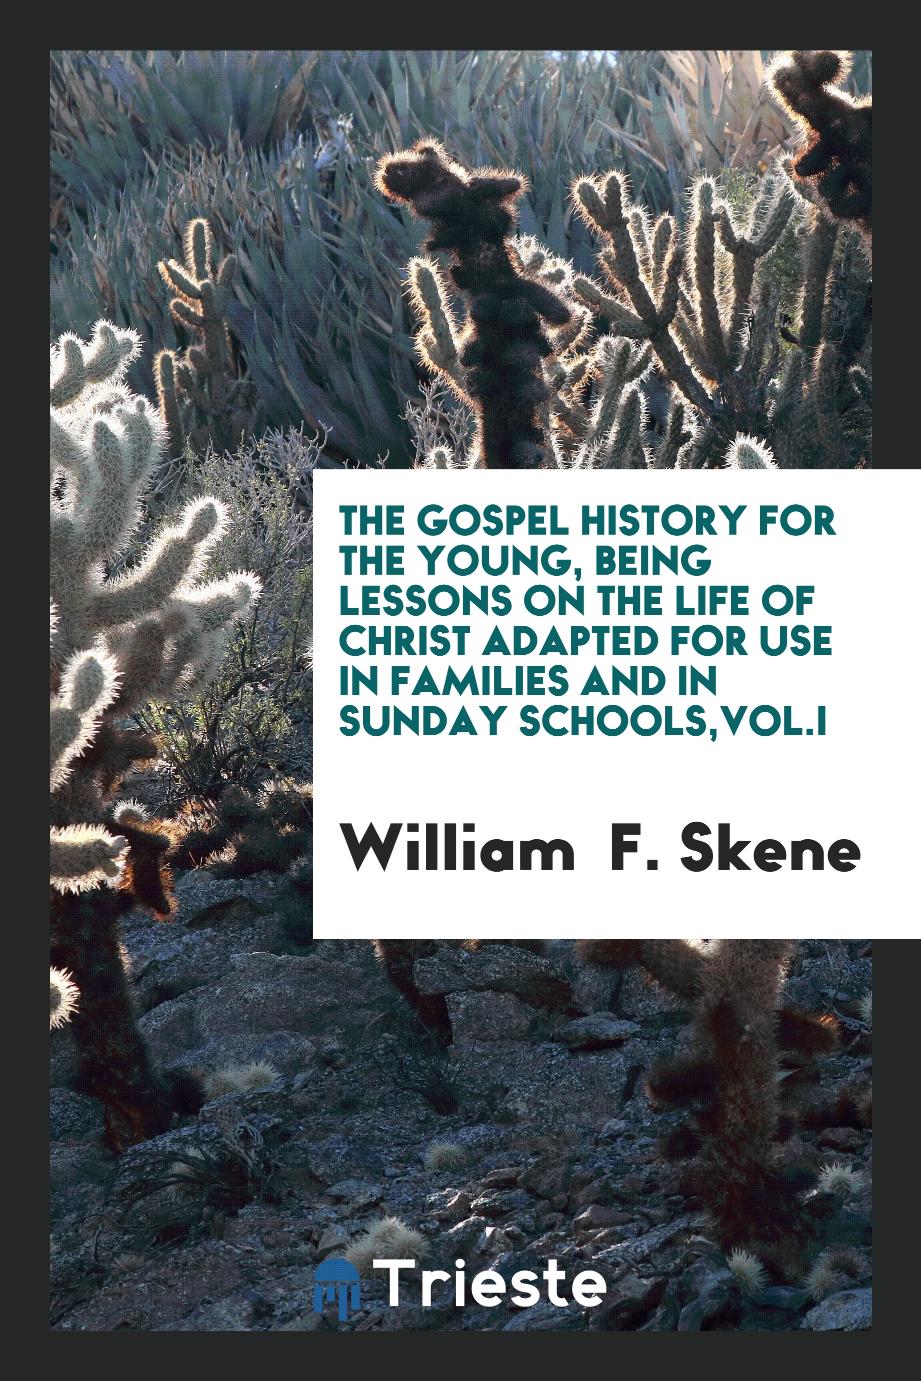 The Gospel history for the young, being lessons on the life of Christ adapted for use in families and in Sunday Schools,Vol.I